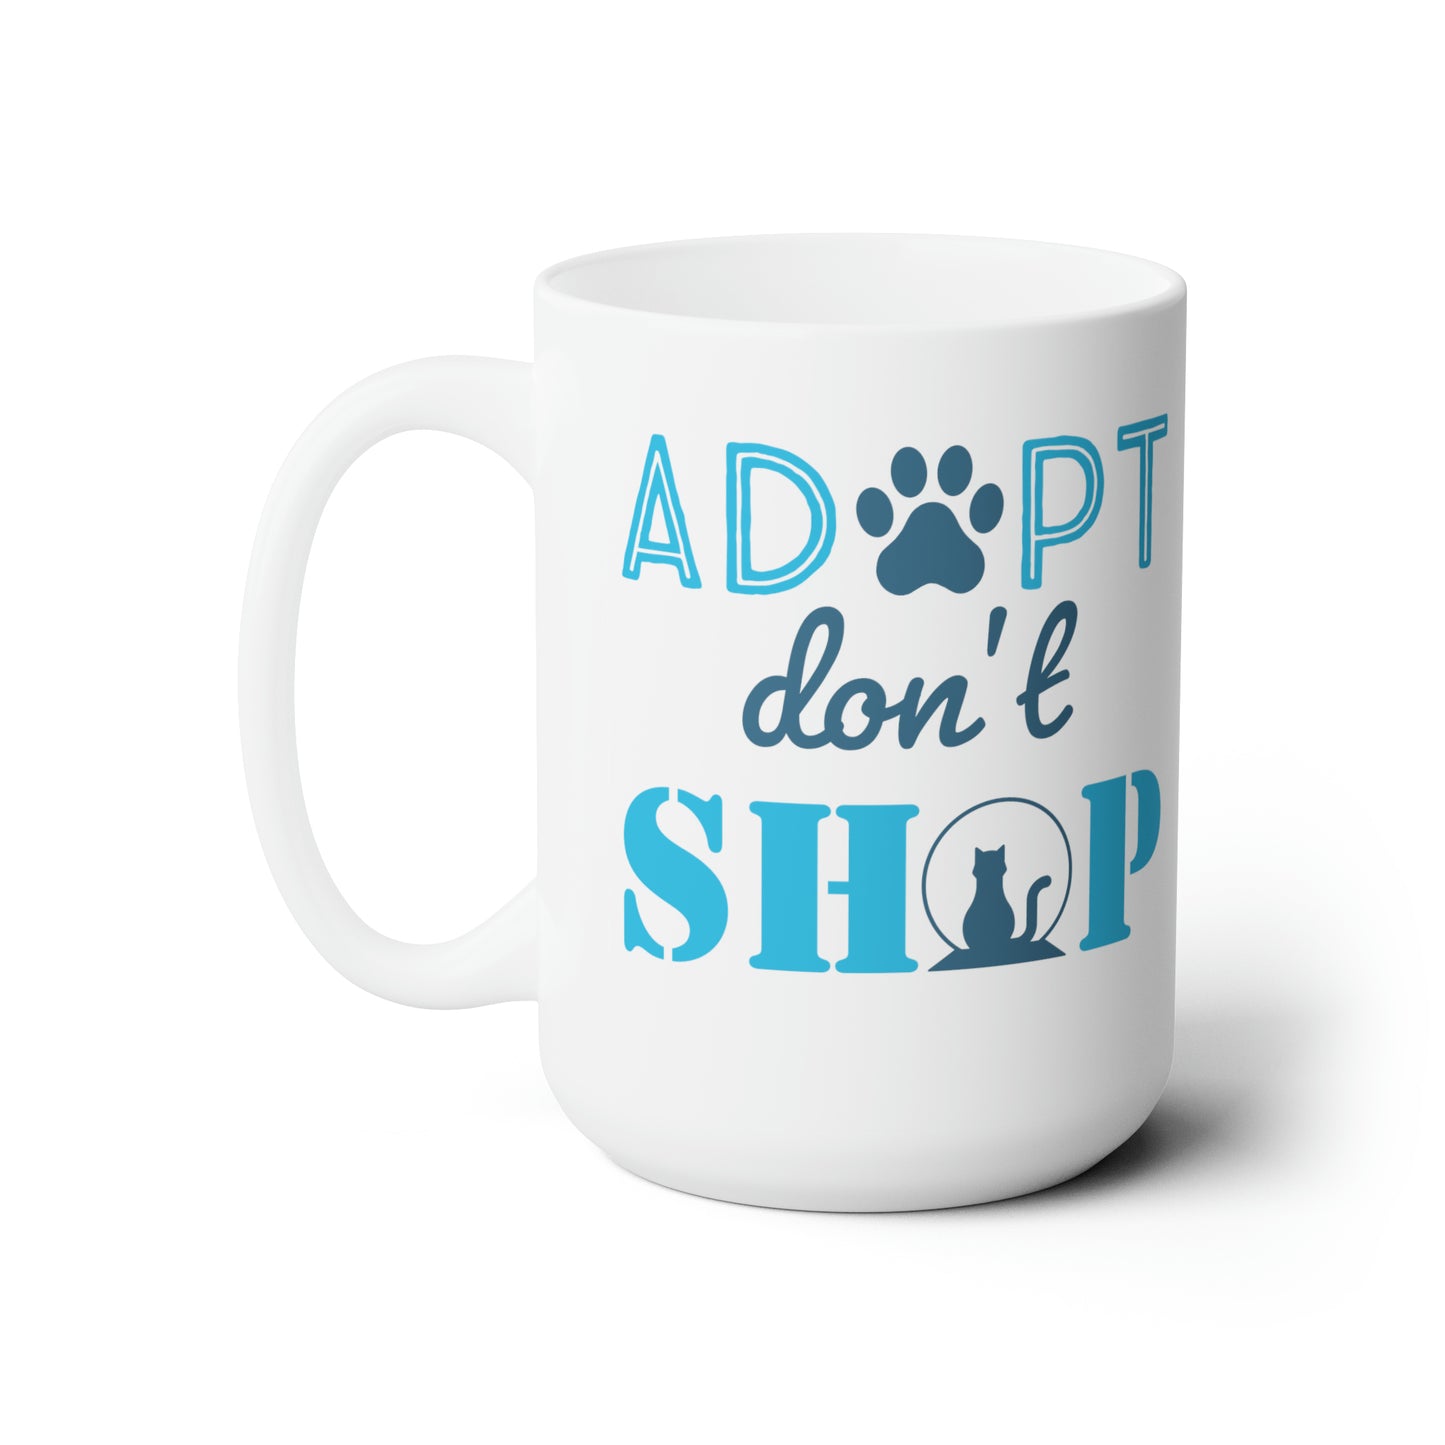 Pet Adoption Coffee Mug For Animal Lovers Hot Tea Cup For Animal Rescuer Gift